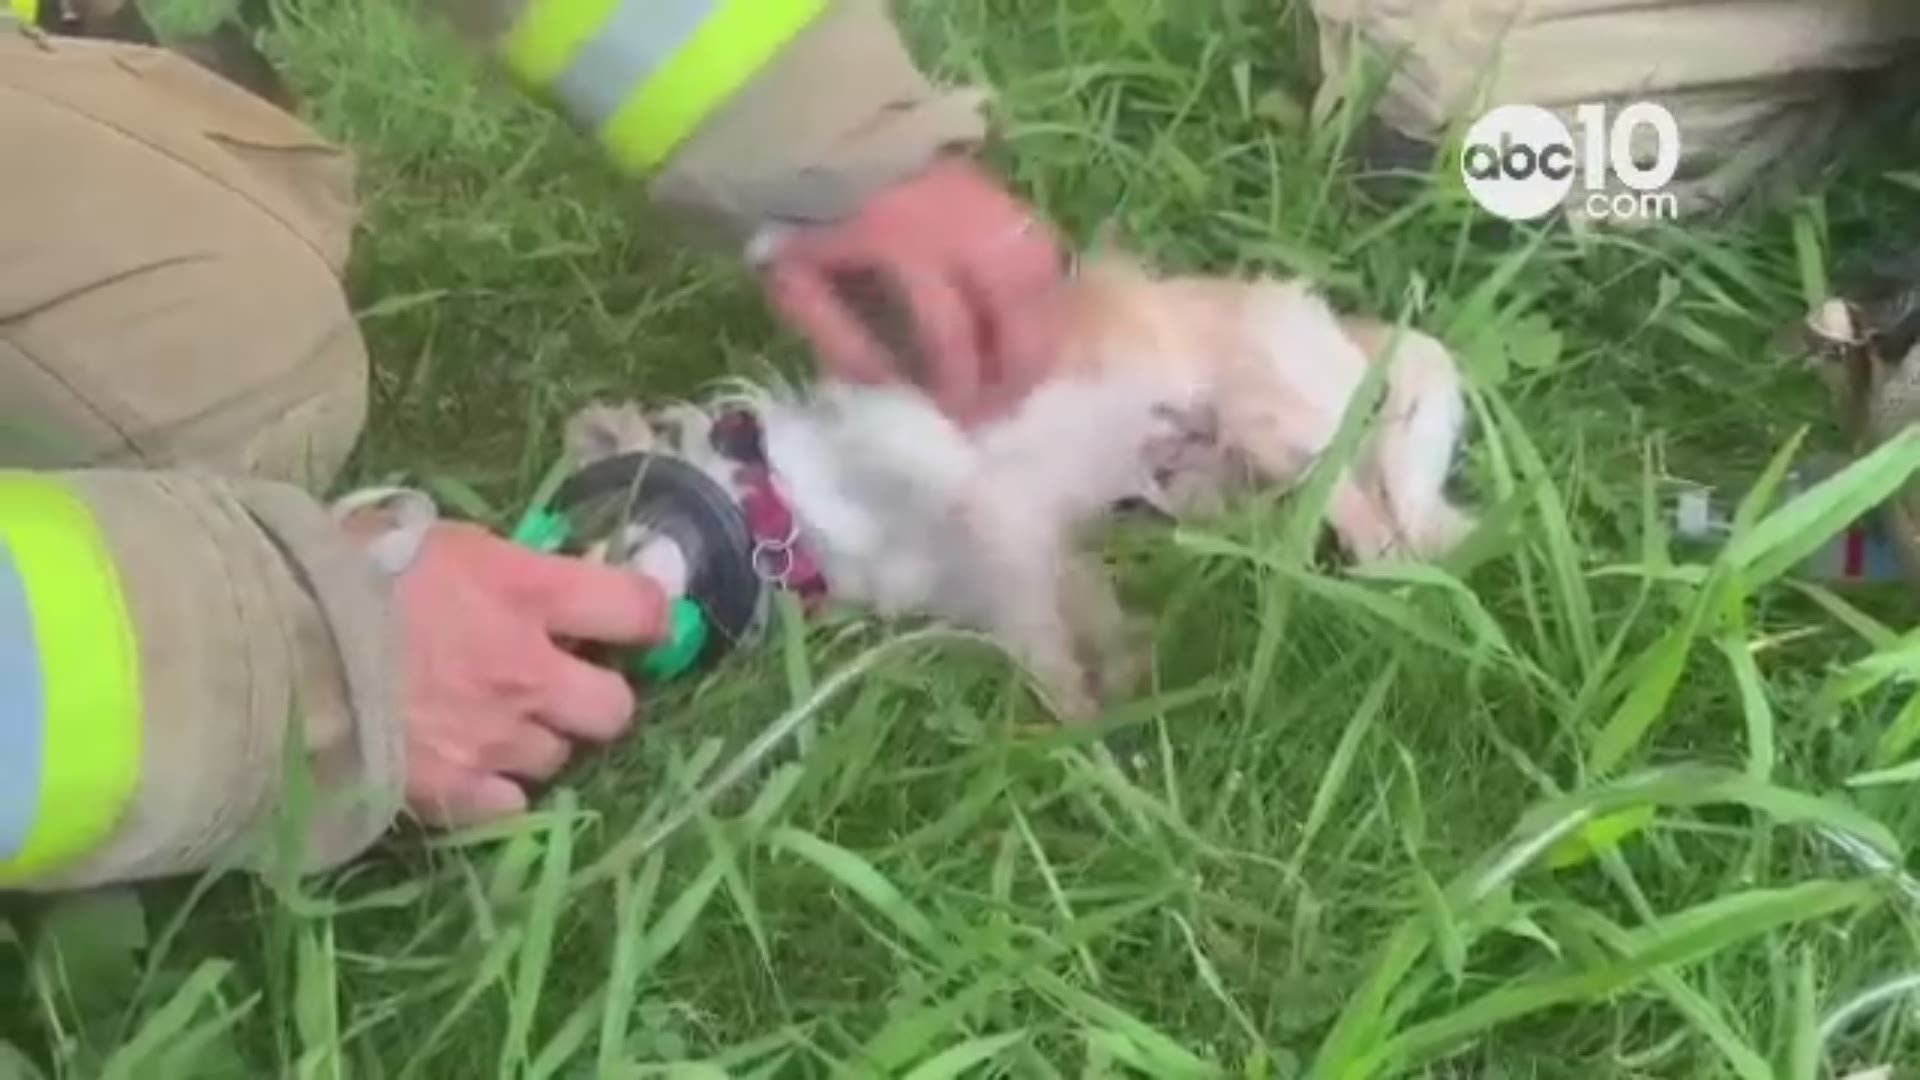 Sacramento Metro firefighters rescue a puppy and attempt to revive it after a housefire in Carmichael.